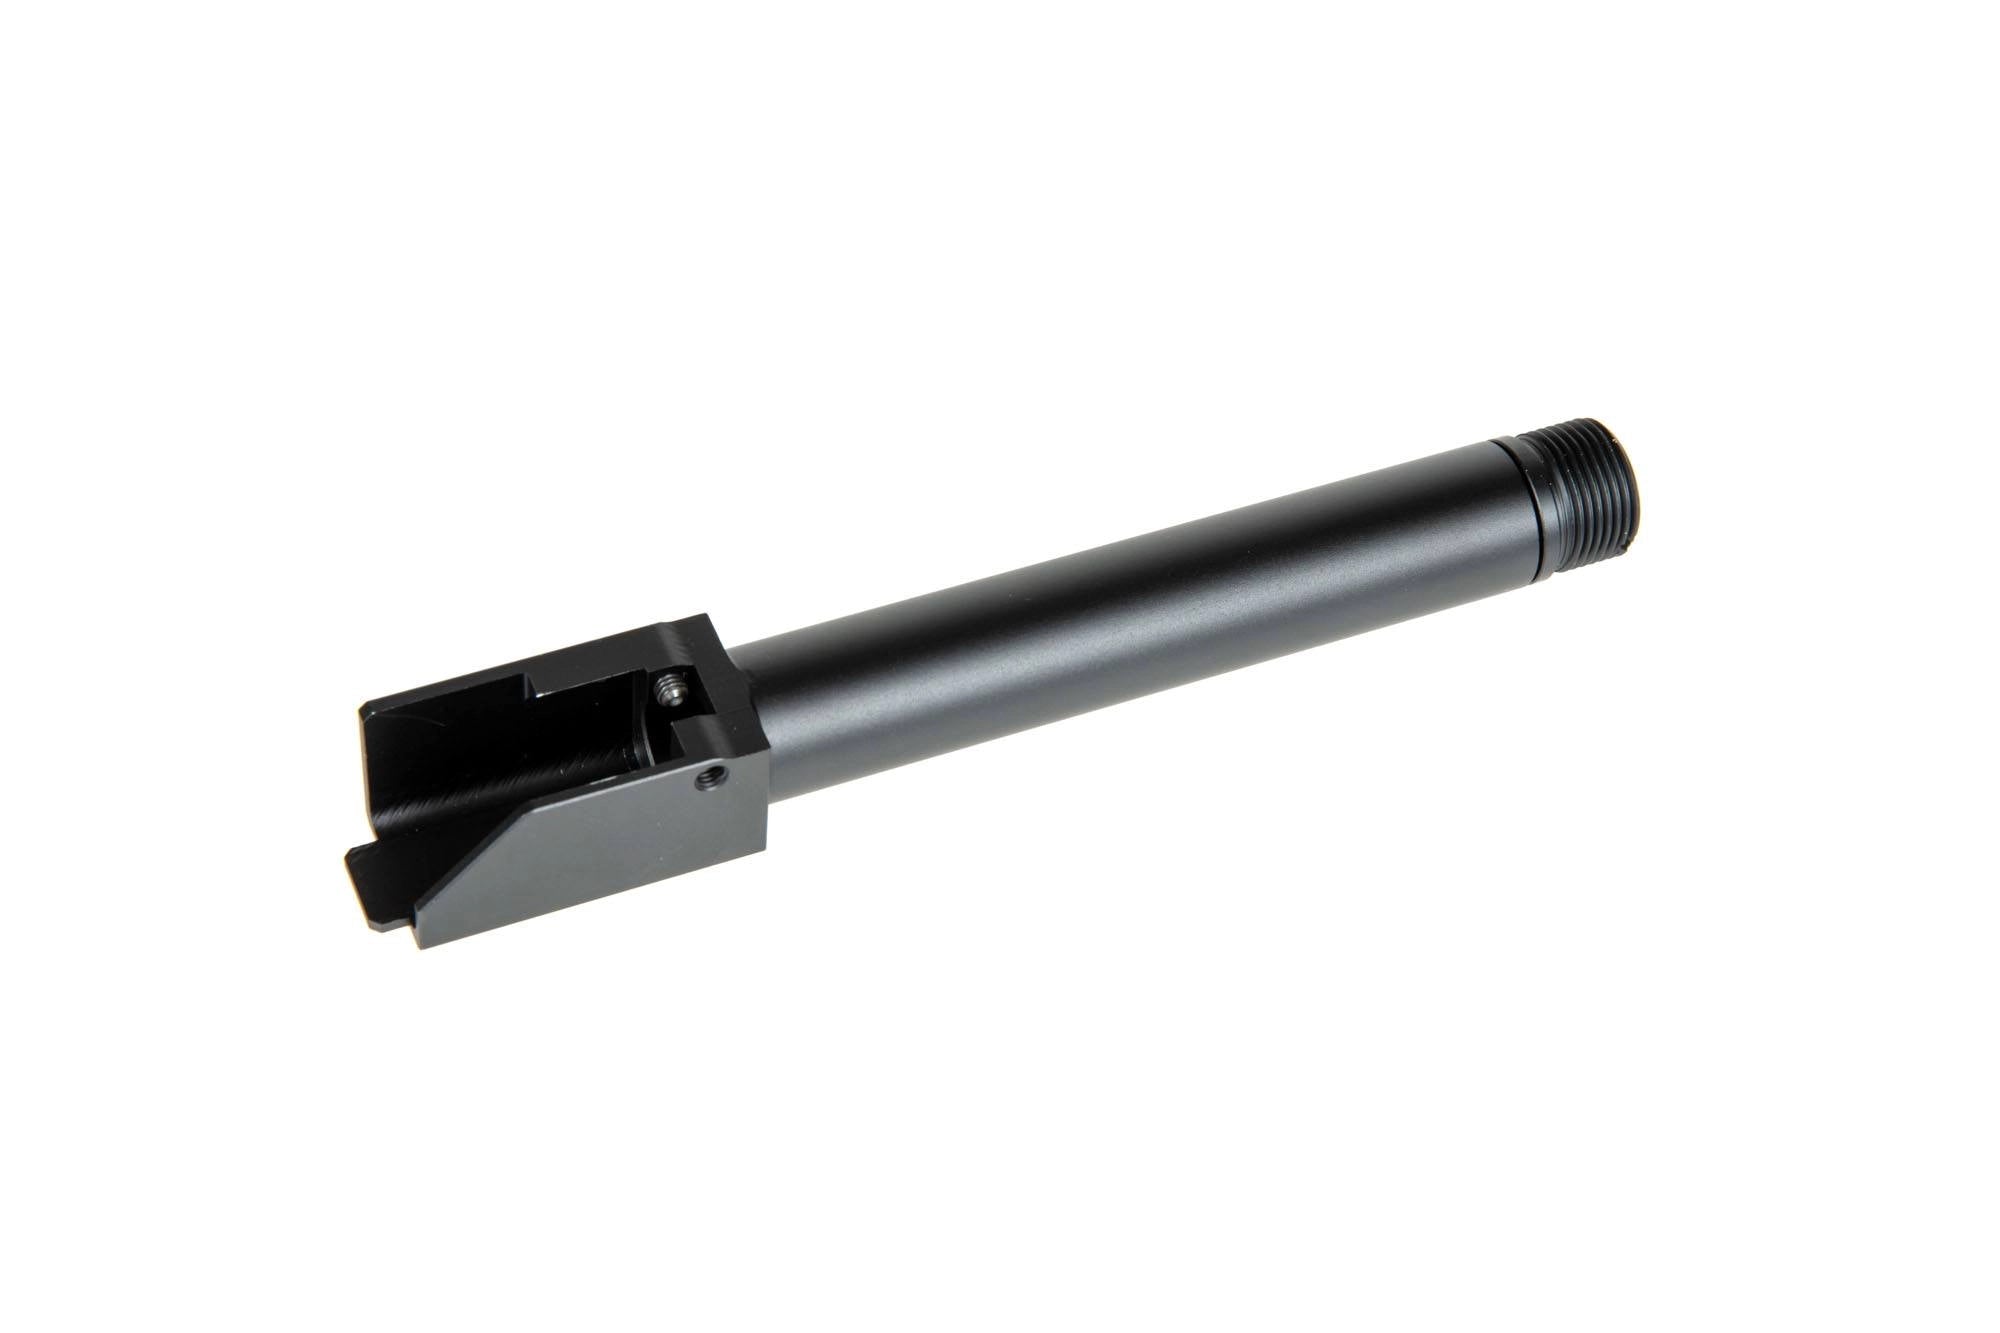 Non-Recoiling 2 Way Fixed" Outer Barrel for TM G17/G18C/G22 Replicas - Black"-2